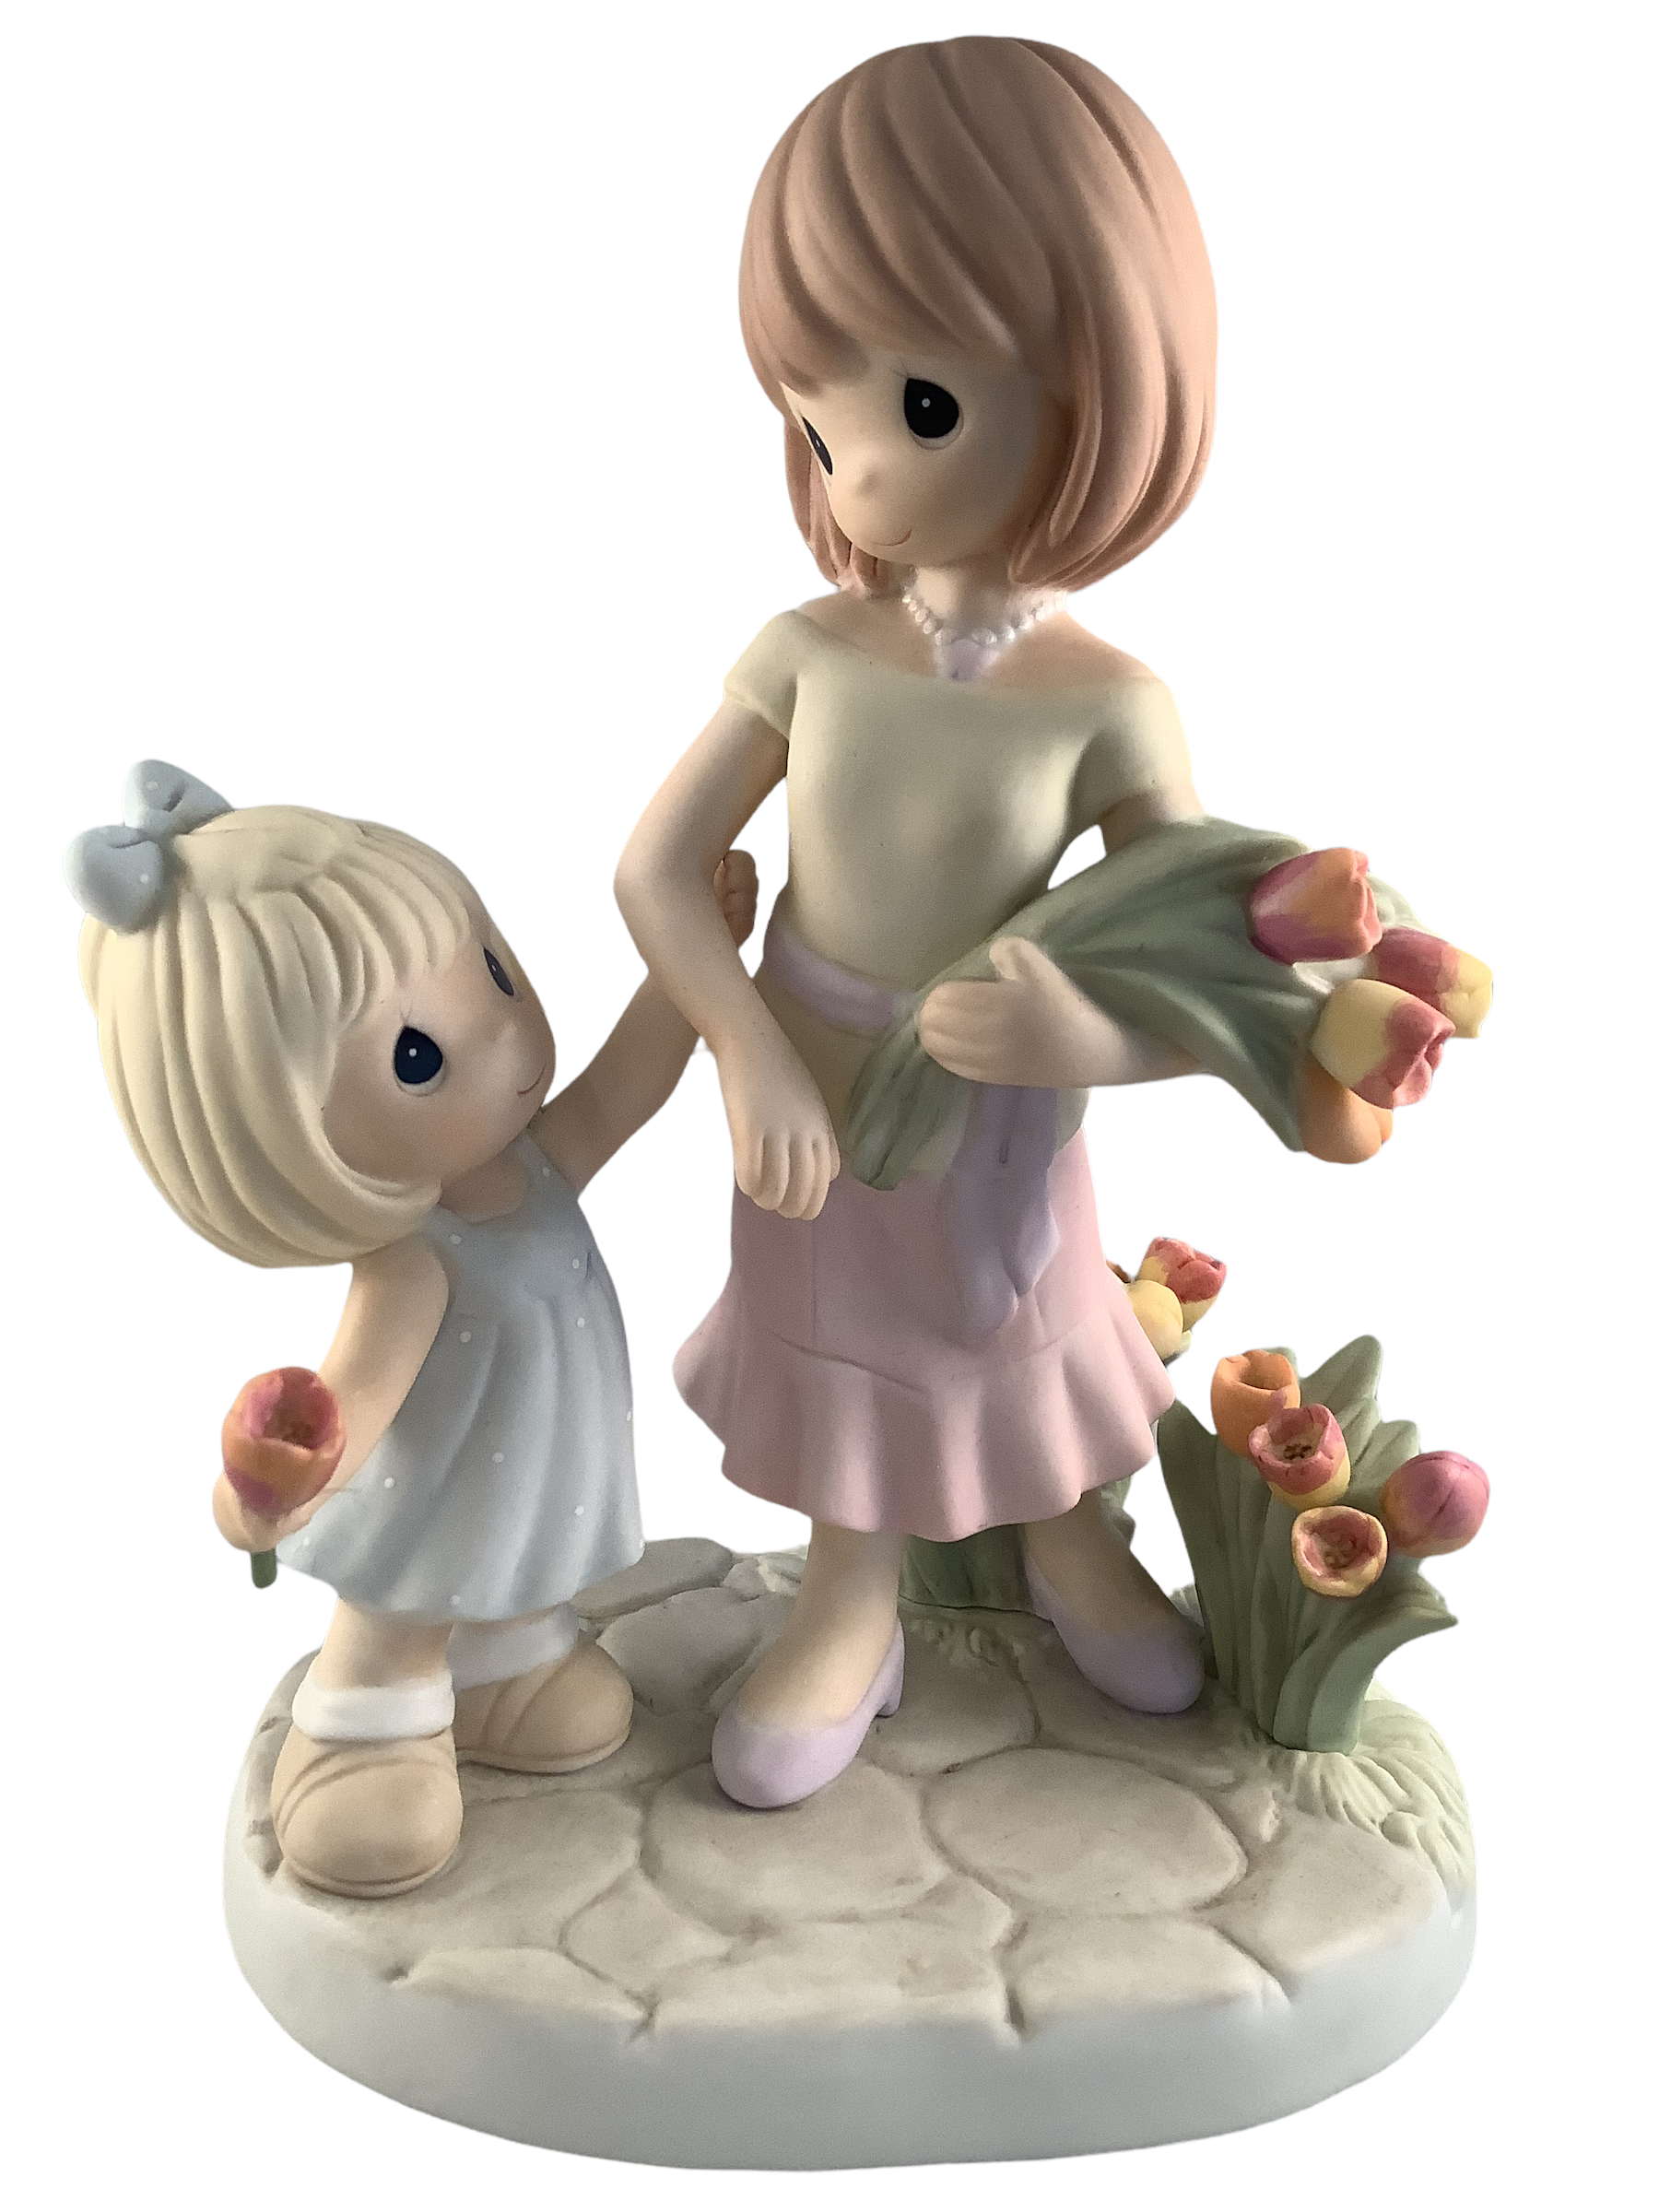 Gentle Is A Mother's Love - Precious Moment Figurine